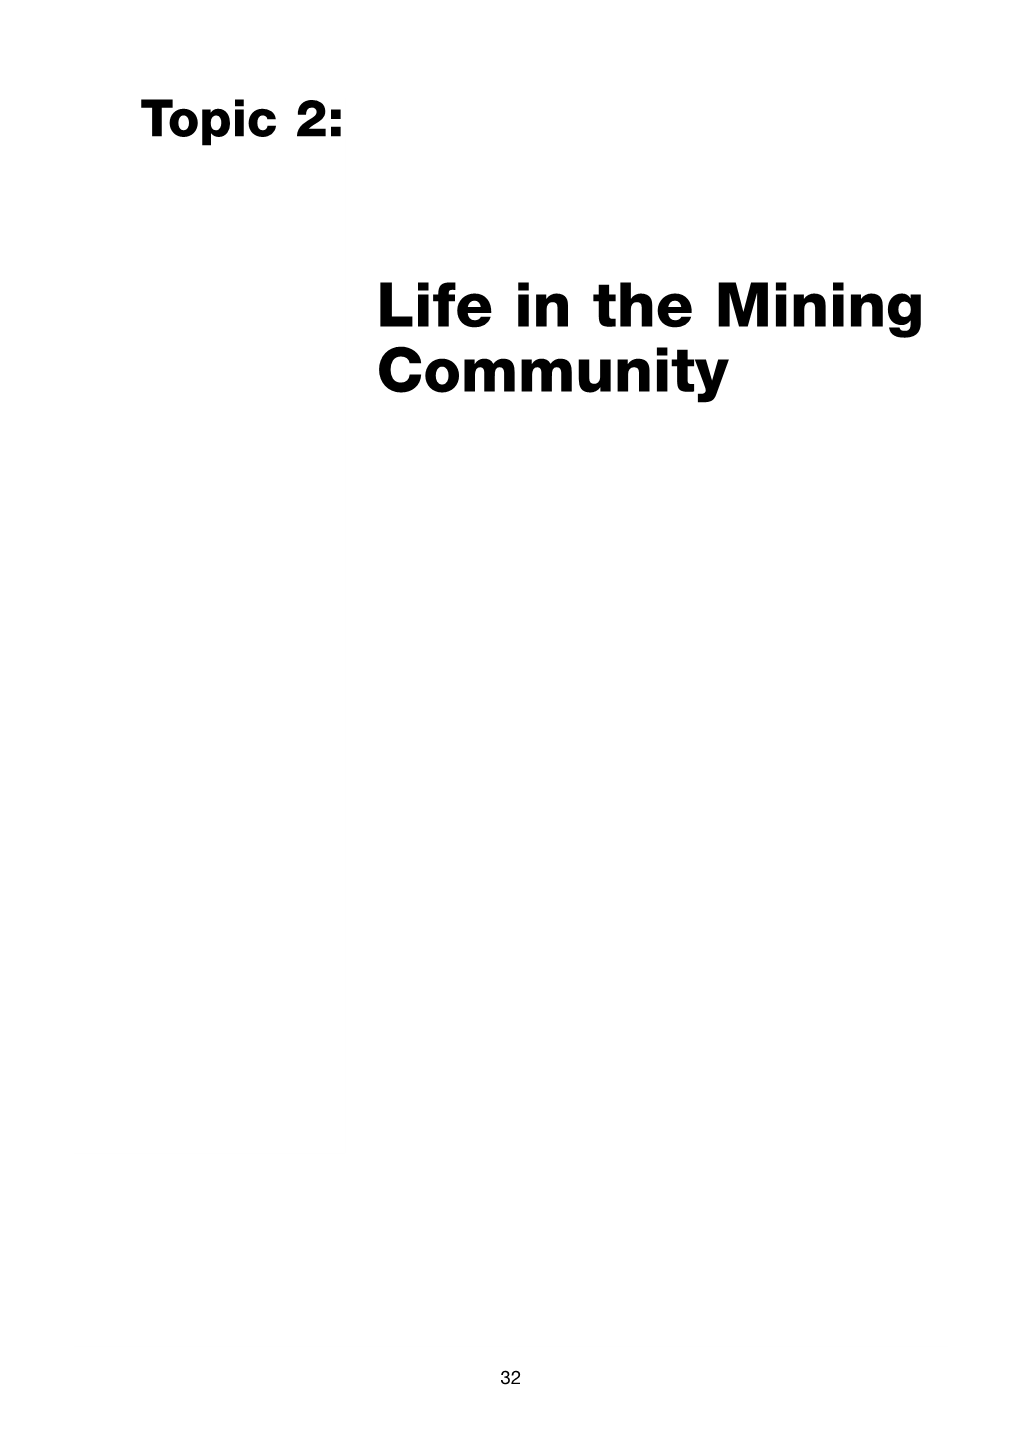 Topic 2: Life in the Mining Community